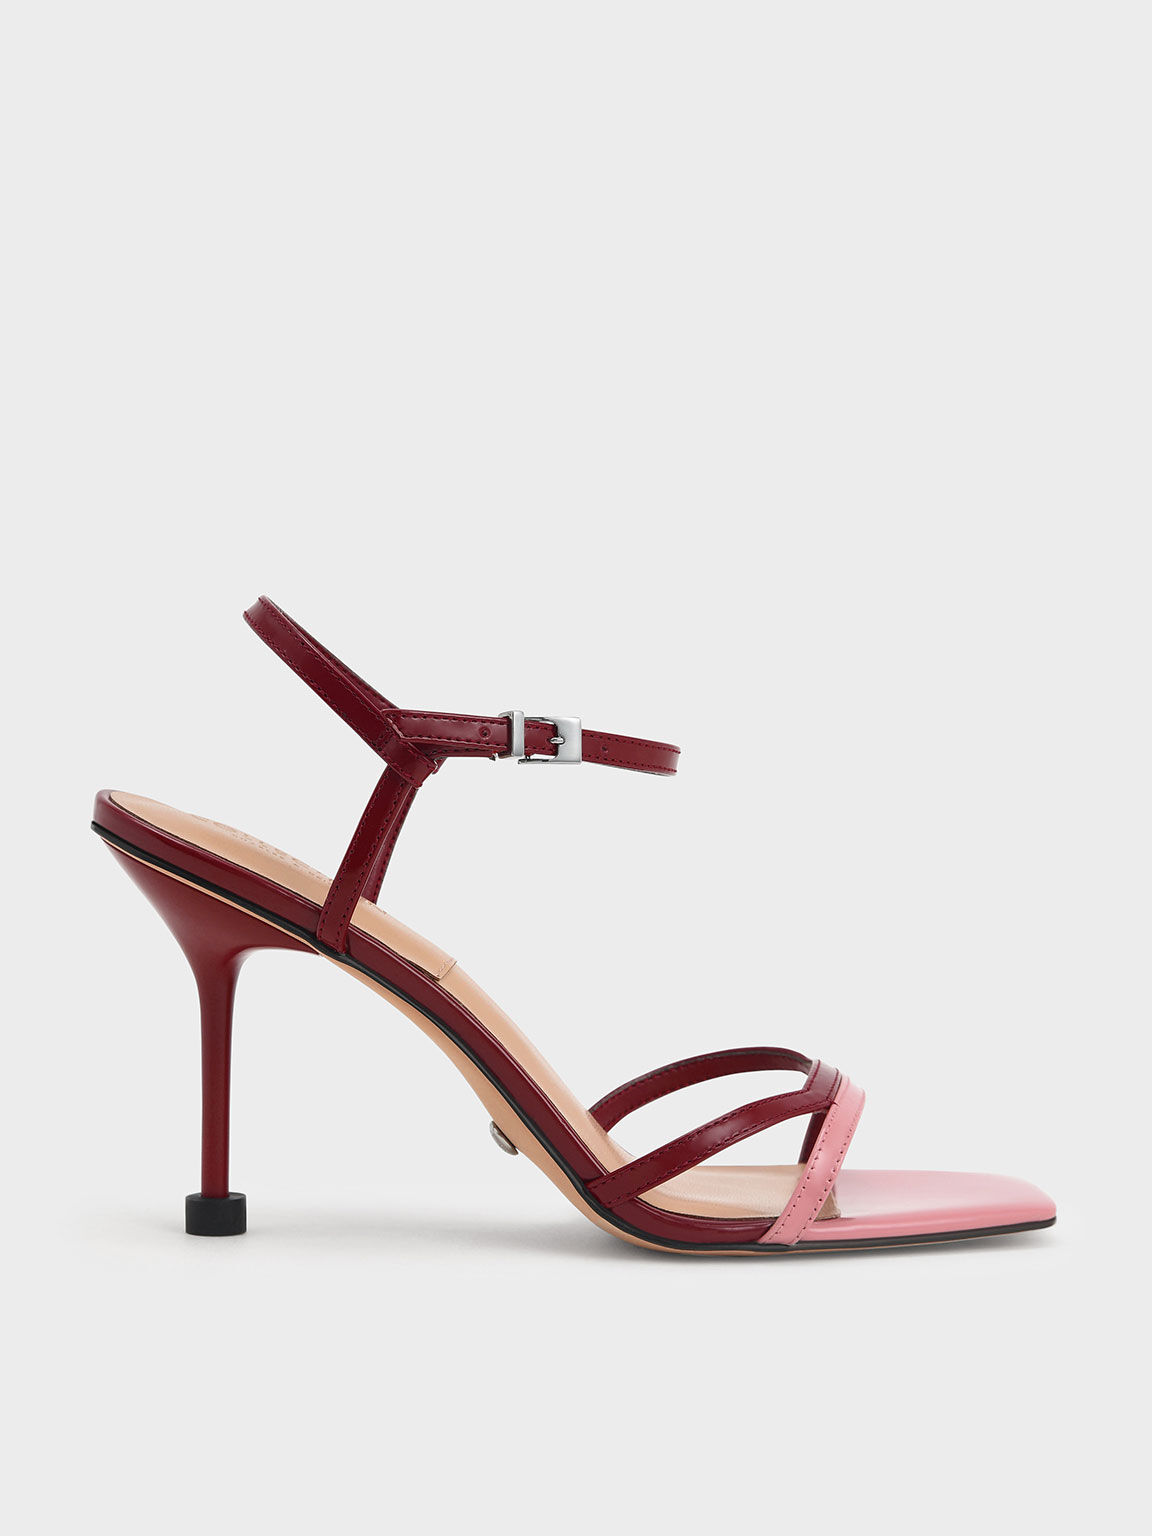 Patent Leather Ankle-Strap Stiletto Sandals, Red, hi-res